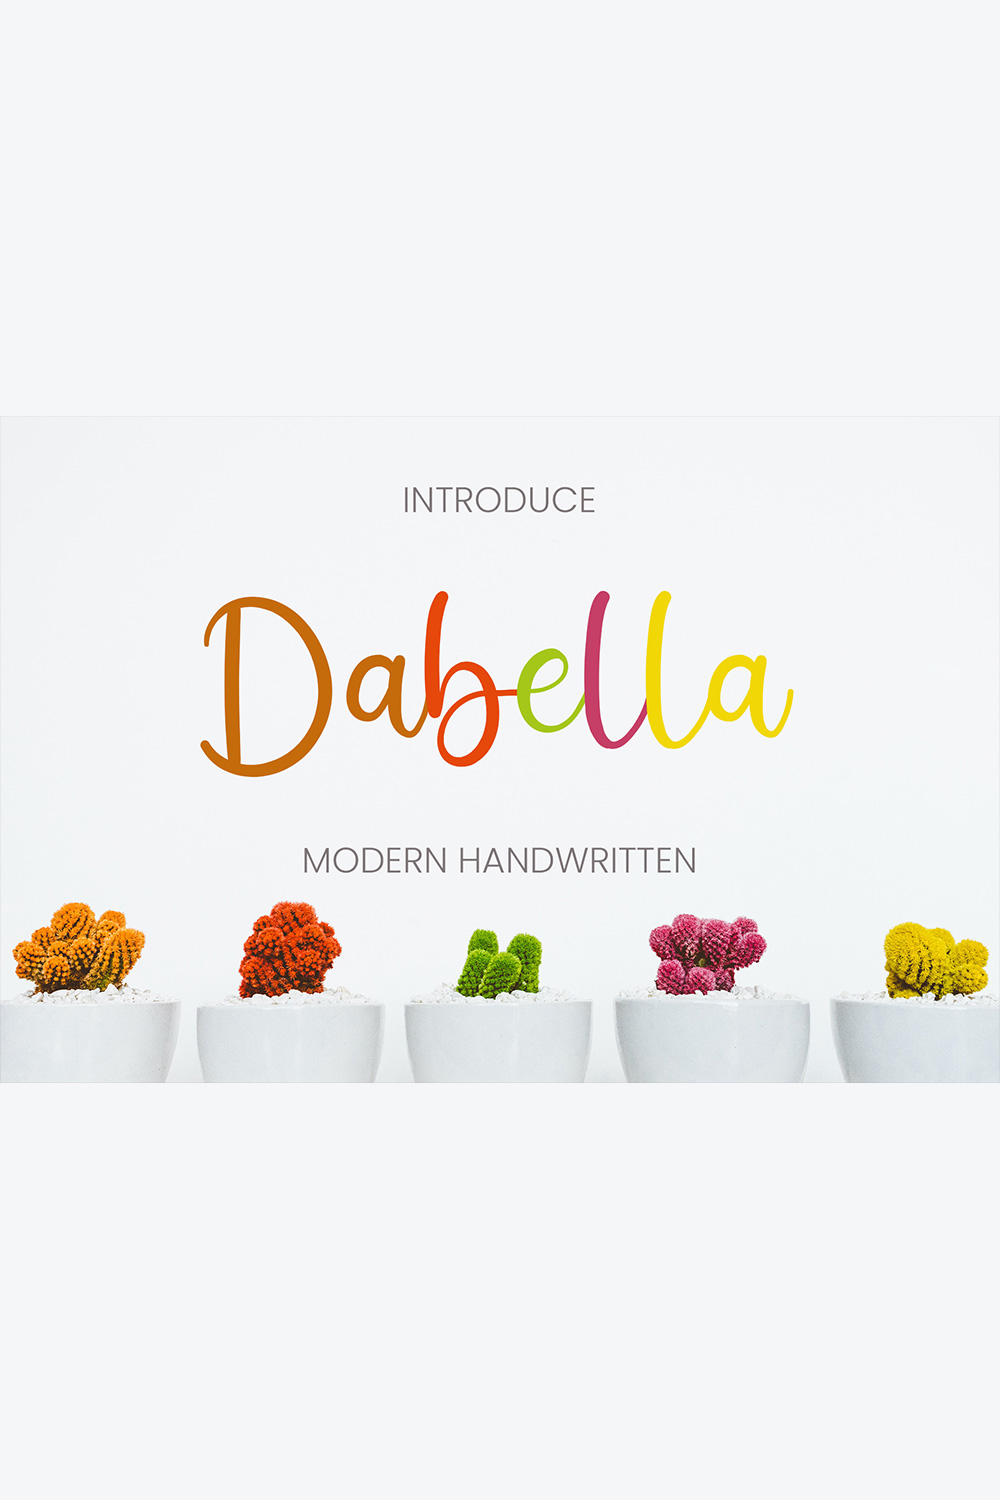 An image with text showing the fabulous Dabella font